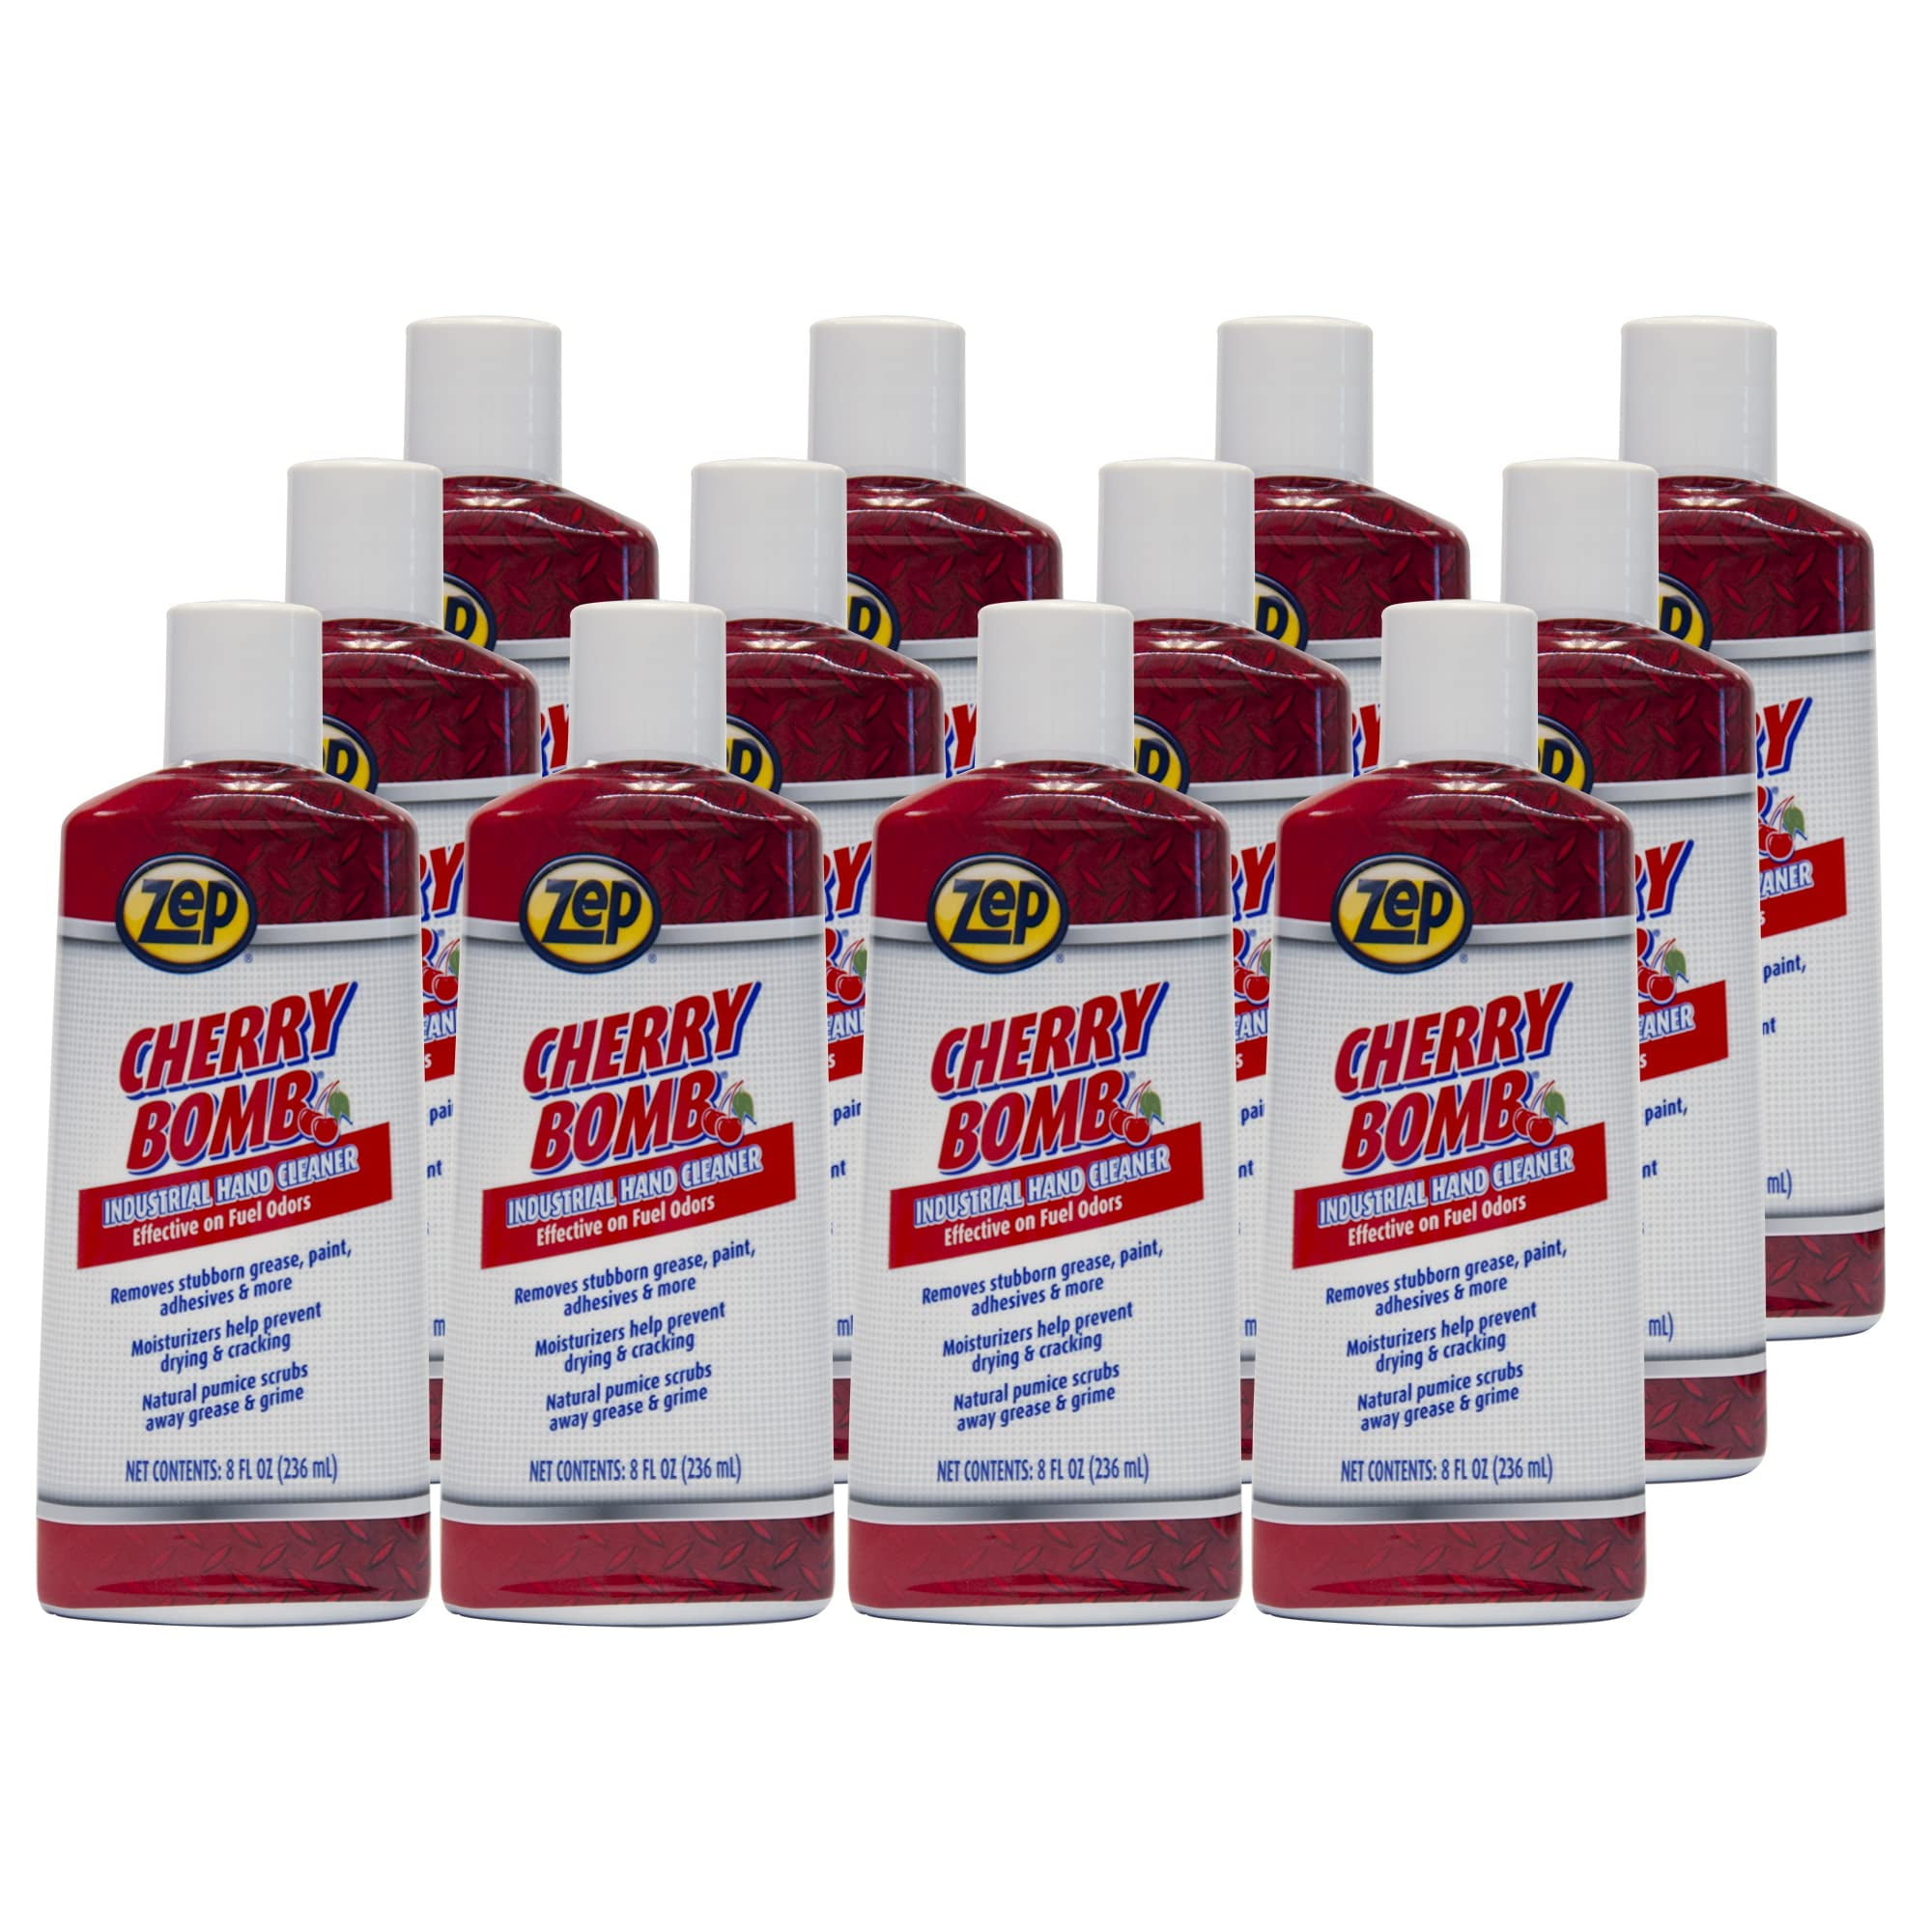 Zep Cherry Bomb Industrial Hand Cleaner Gel with Pumice - 8 oz